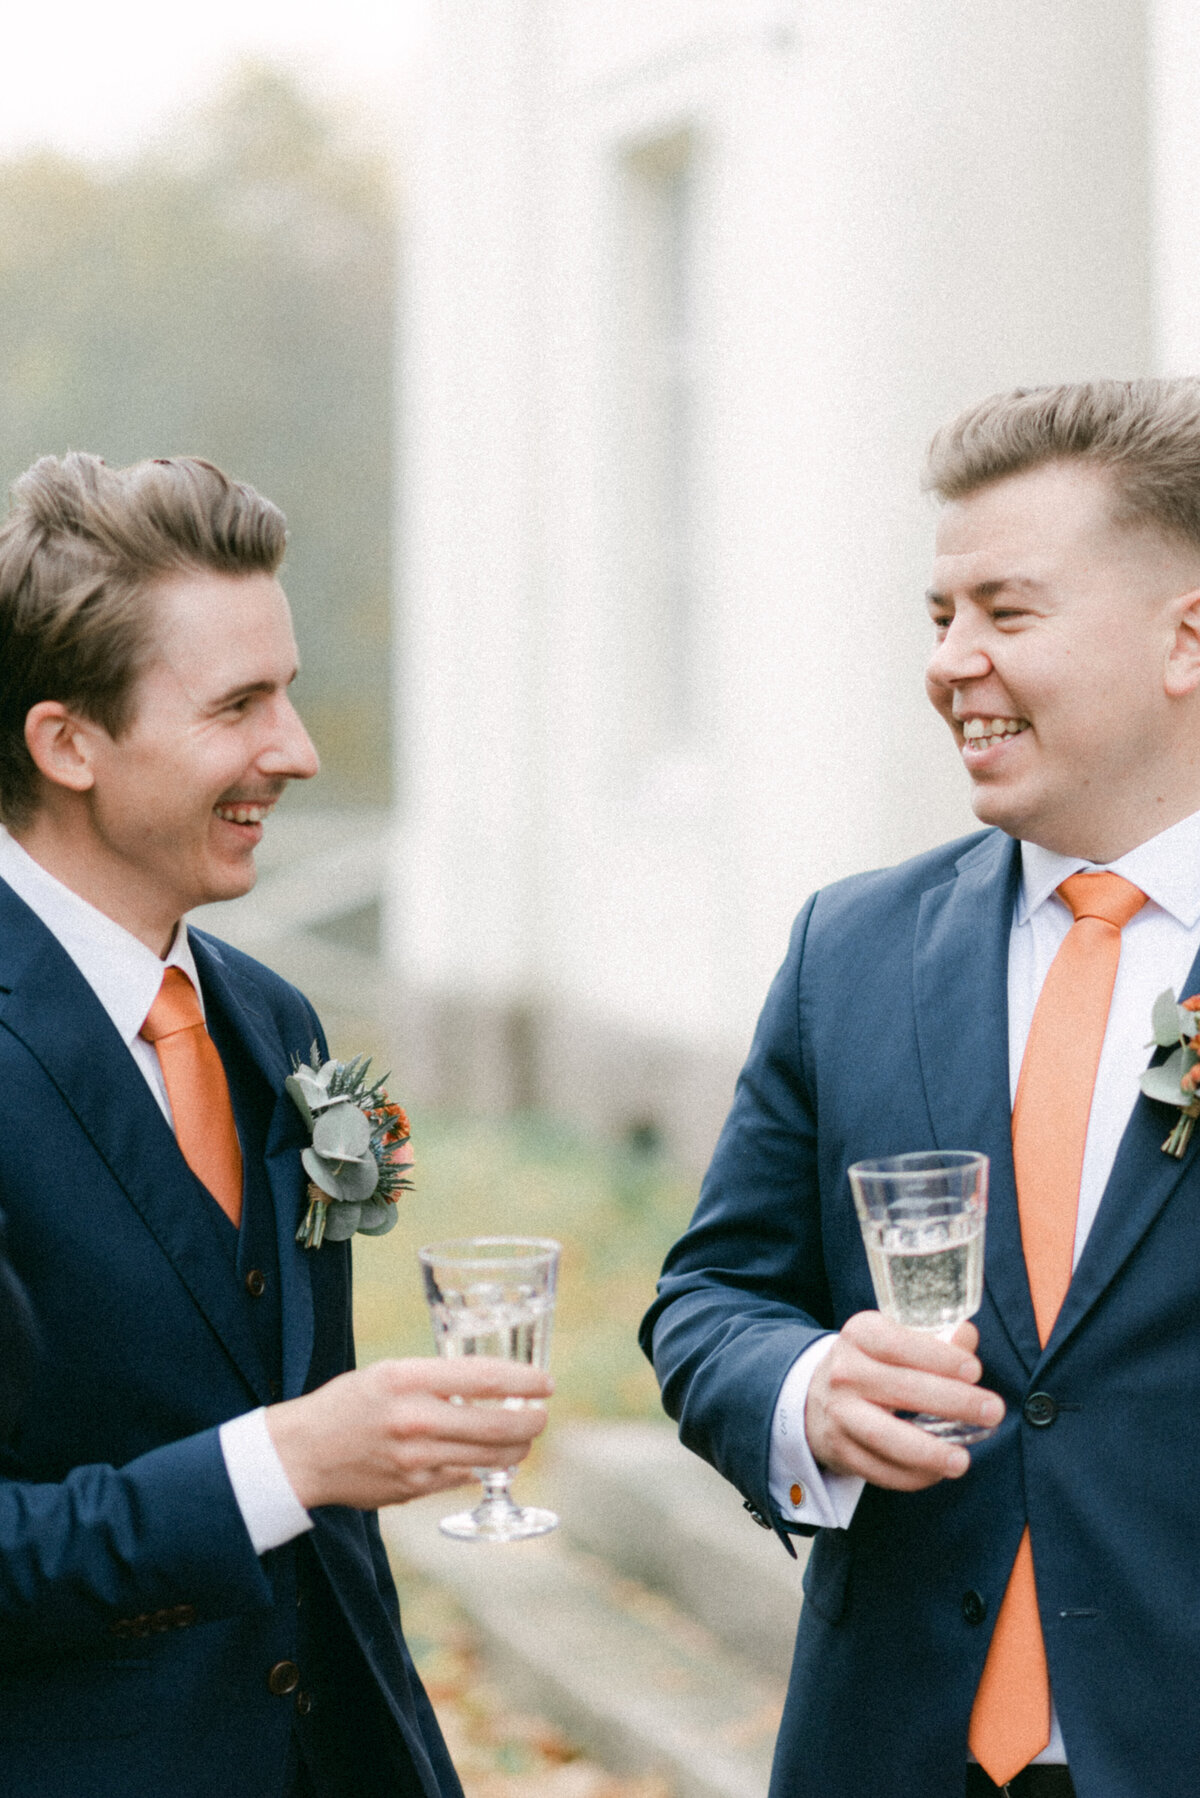 A documentary wedding  photo of the groom getting ready with his bestman and grooms men in Oitbacka gård captured by wedding photographer Hannika Gabrielsson in Finland